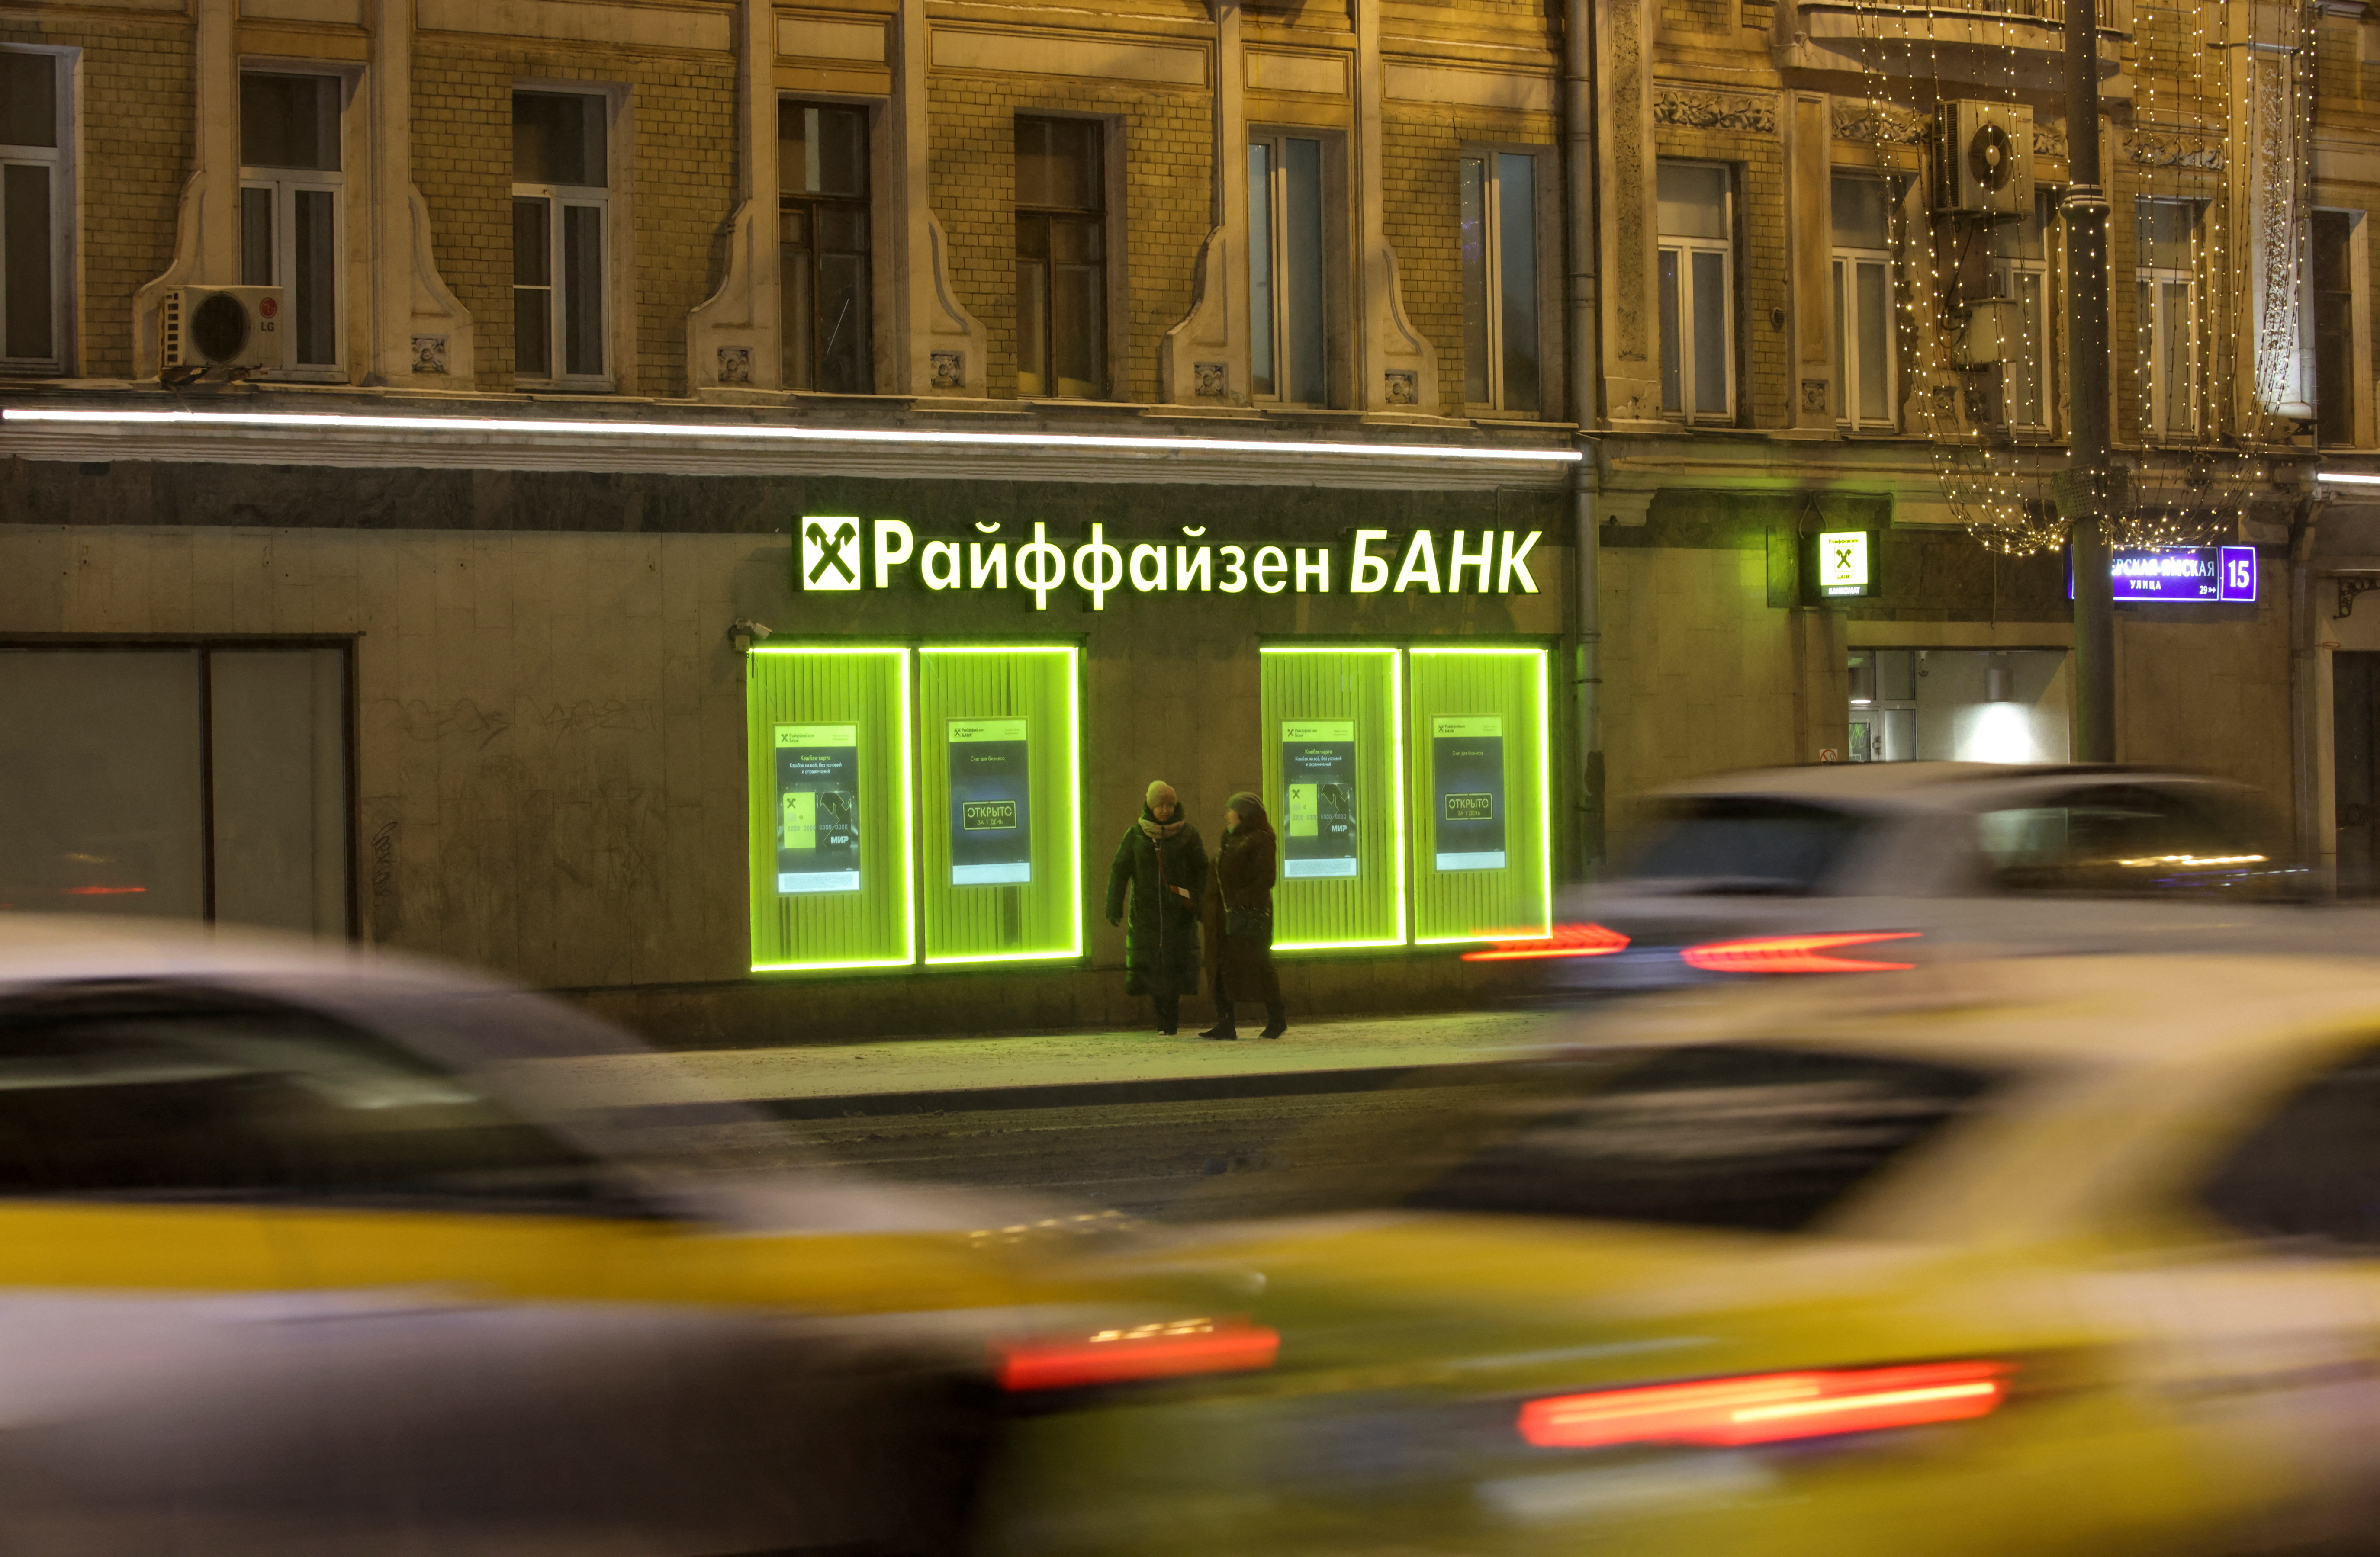 A view shows a branch of Raiffeisen Bank in Moscow